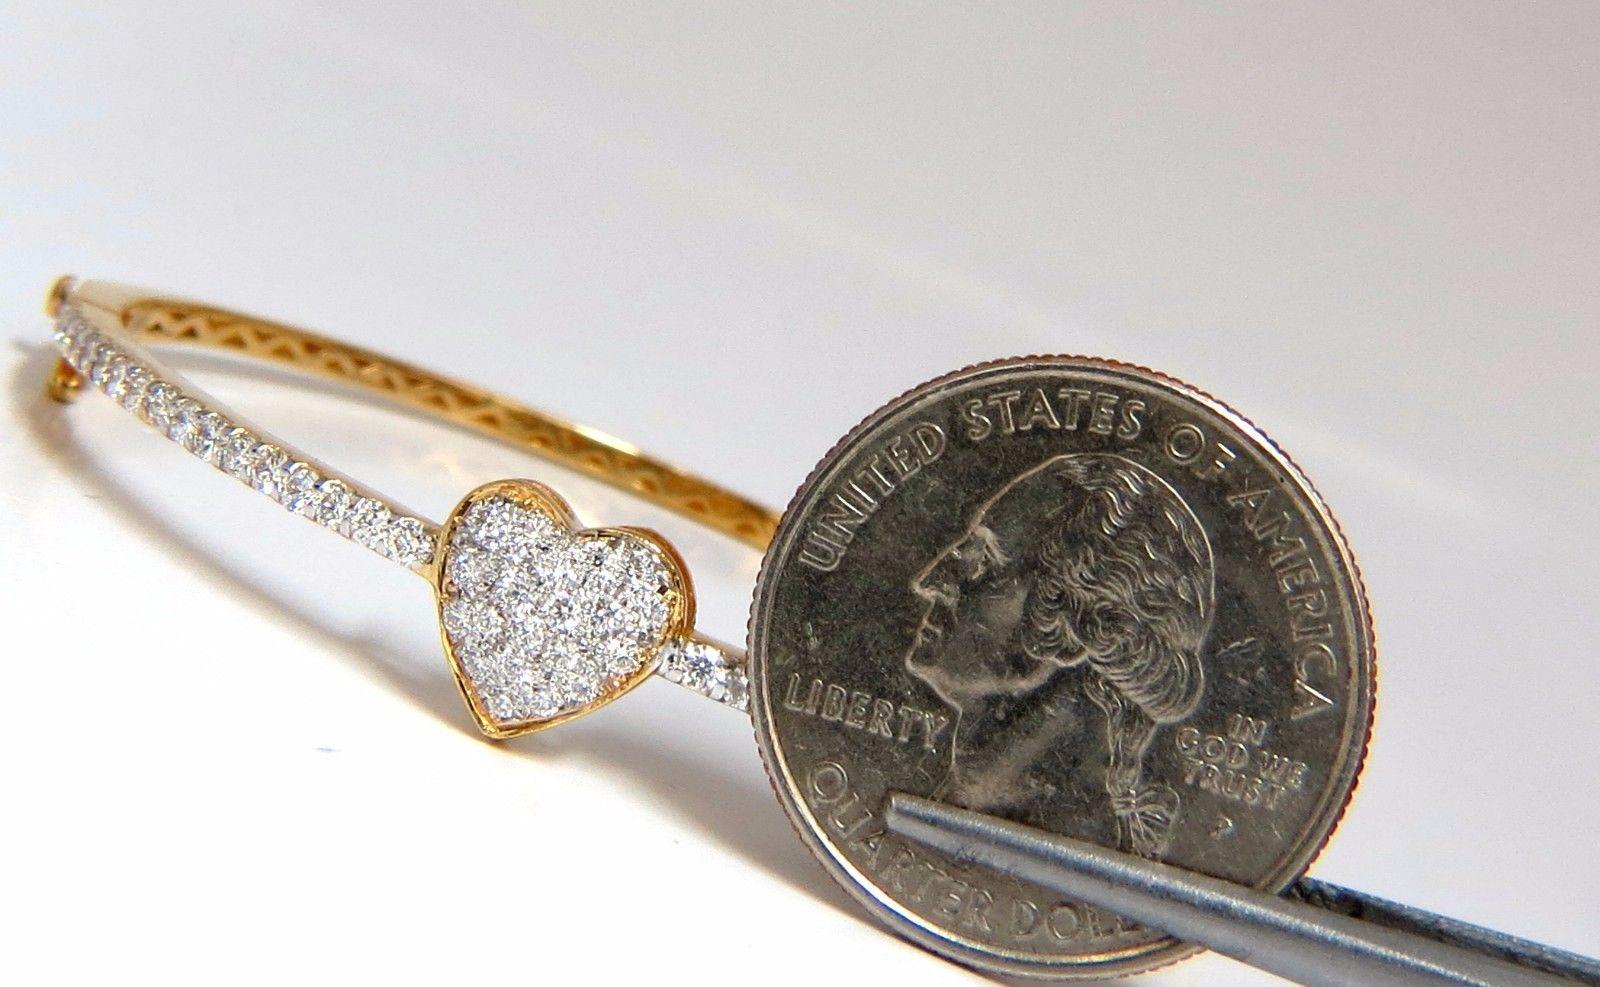 Heart Bangle.

1.30ct. Natural diamonds bangle bracelet.

Bead set, smooth & clean finish.

Round, Full cuts, 

G color

Vs-2 clarity.

14kt. yellow gold 

7.6 Grams.

10mm wide at heart.

Made for 7 inch wrist

safety clasp/ snap lock

$6000